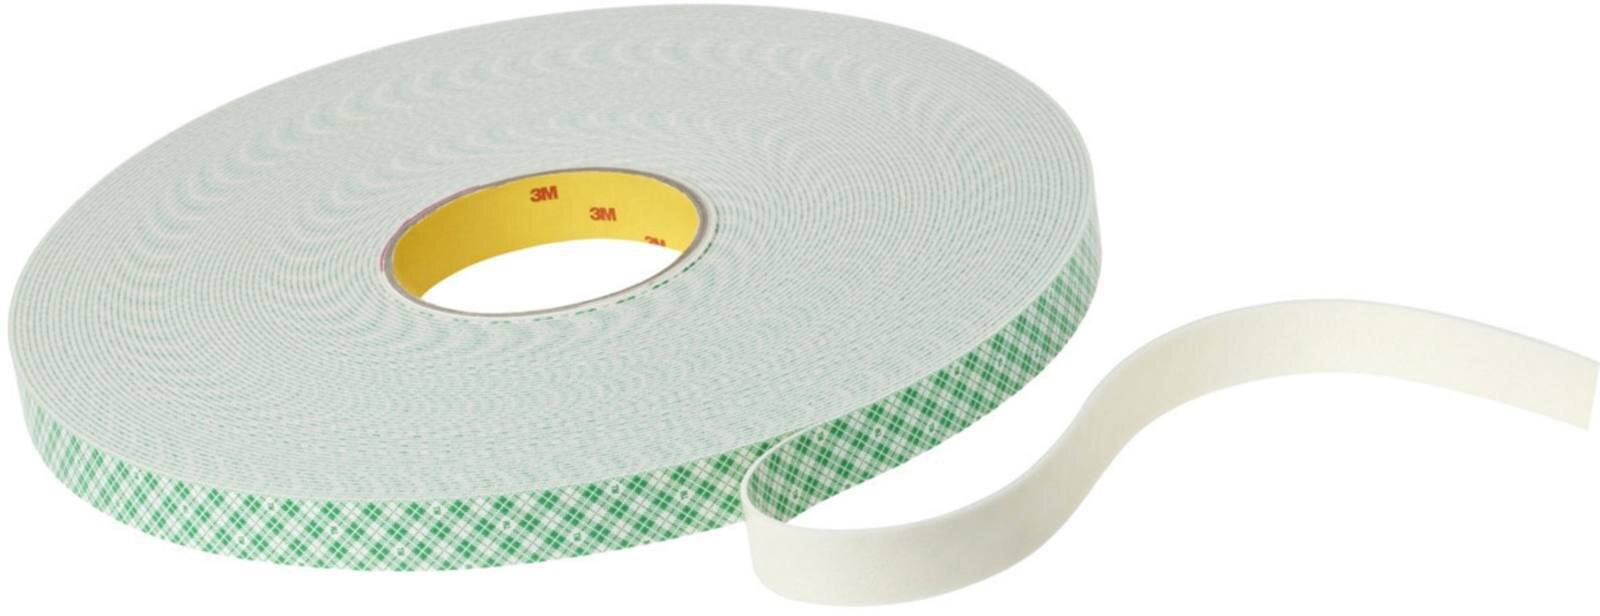 3M PU foam adhesive tape with acrylic adhesive 4026, beige, 38 mm x 33 m, 1.6 mm